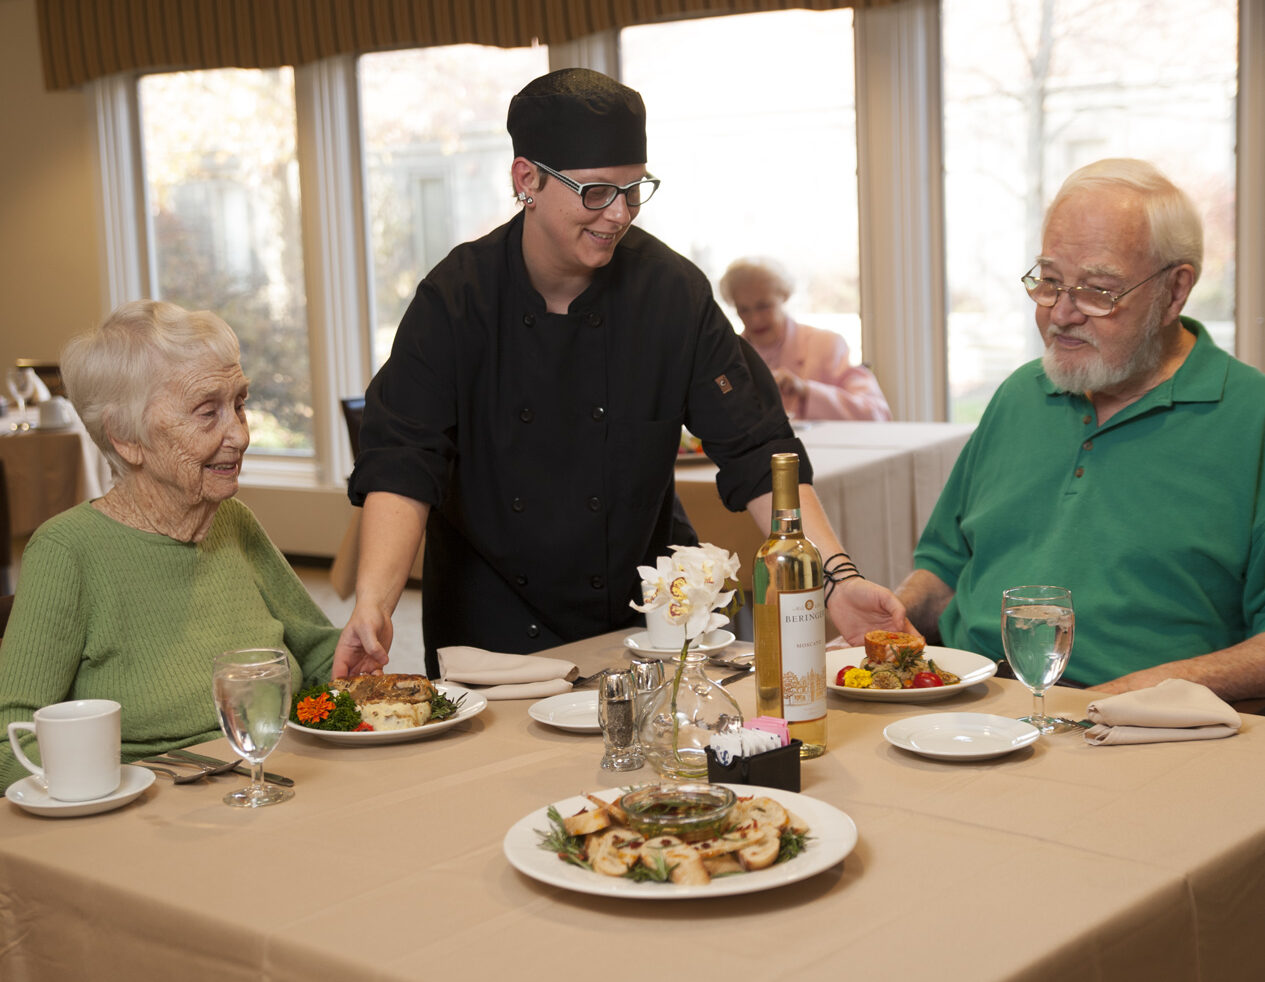 Chef bringing out dishes to senior residents